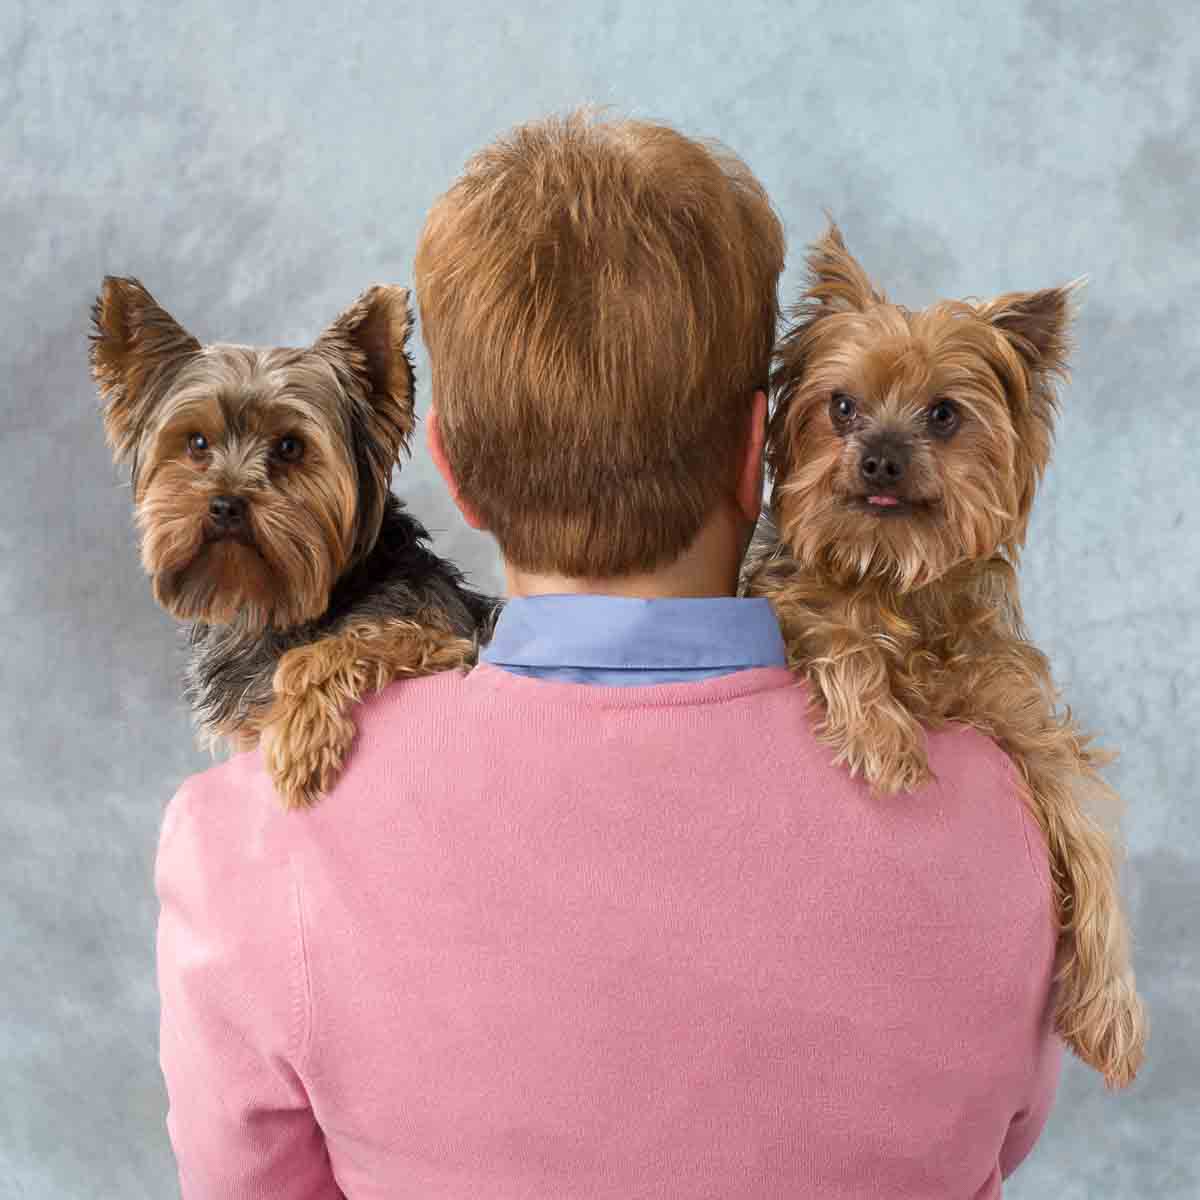 A man with two small dogs on his shoulders.